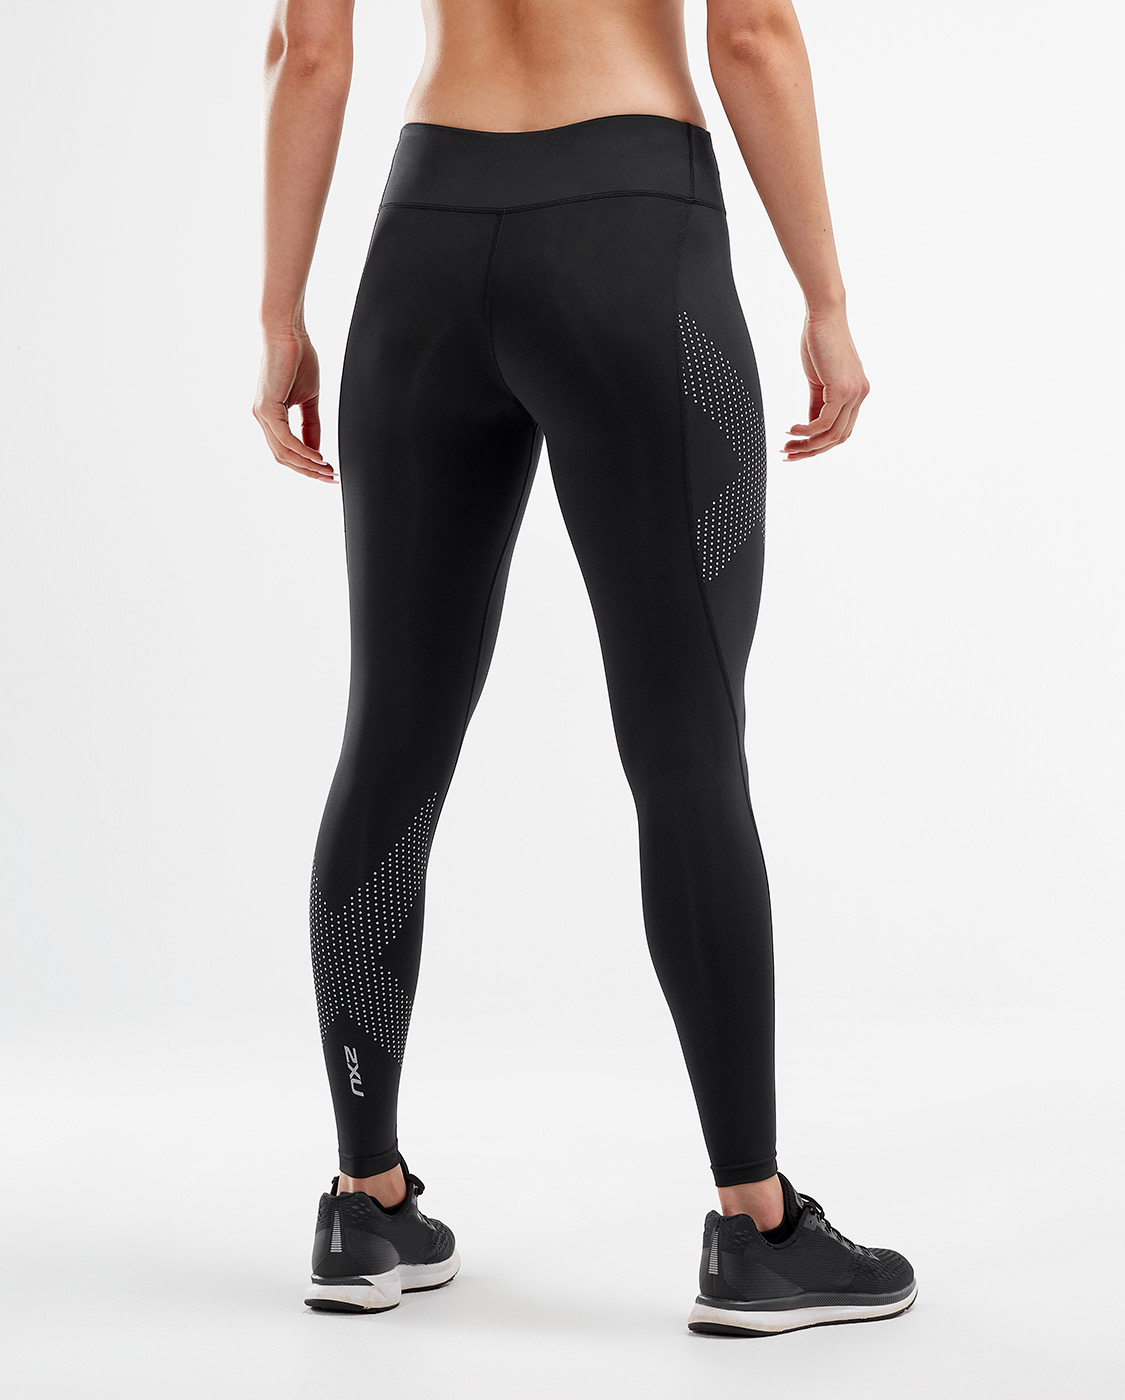 2XU Women's Mid-Rise Compression Tight - Black/Dotted Reflective Logo